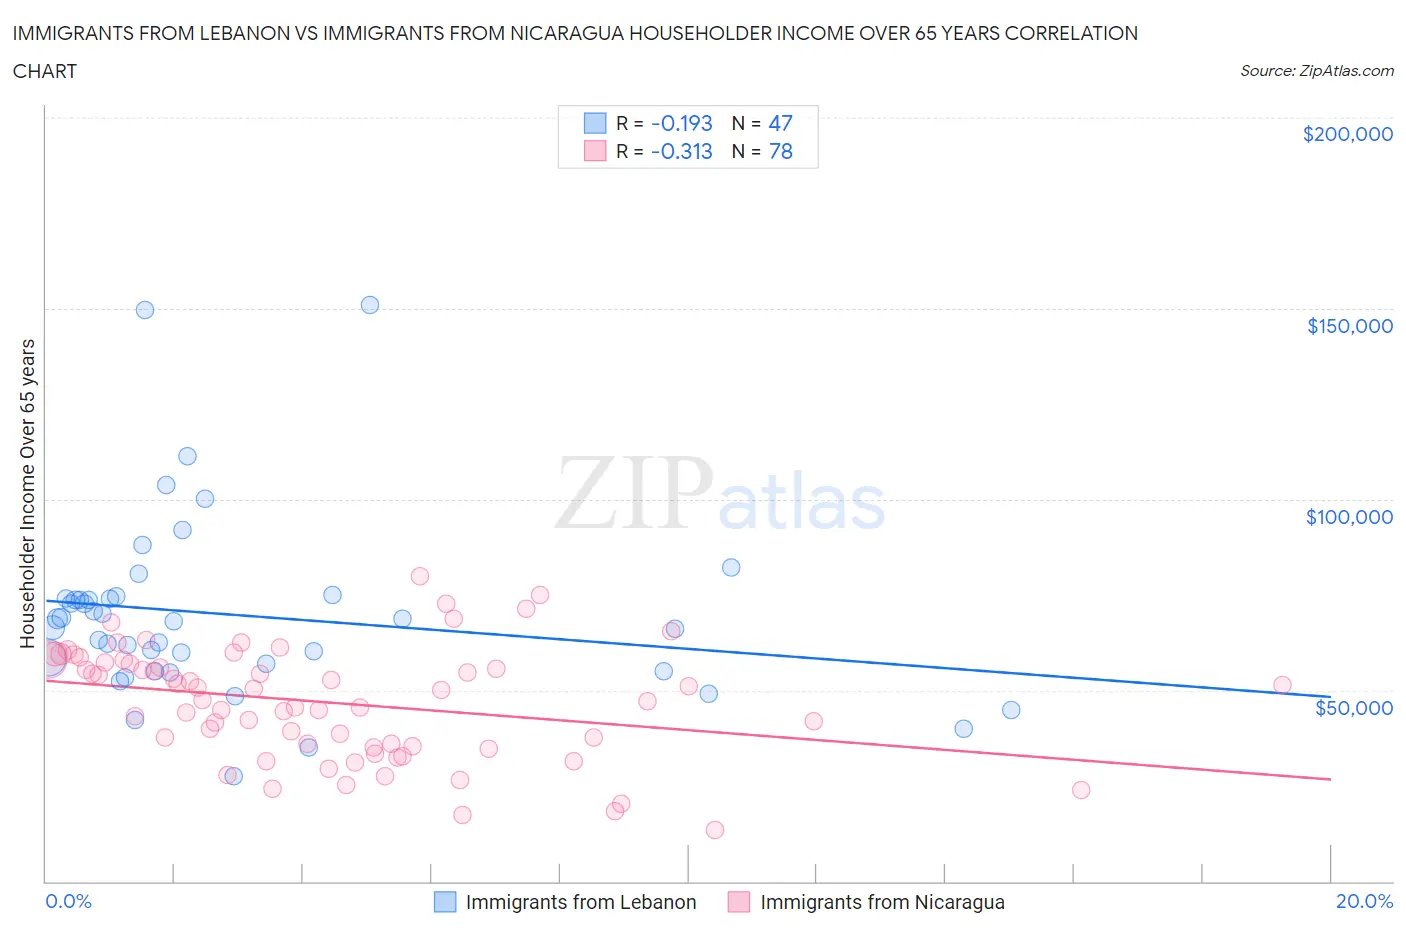 Immigrants from Lebanon vs Immigrants from Nicaragua Householder Income Over 65 years